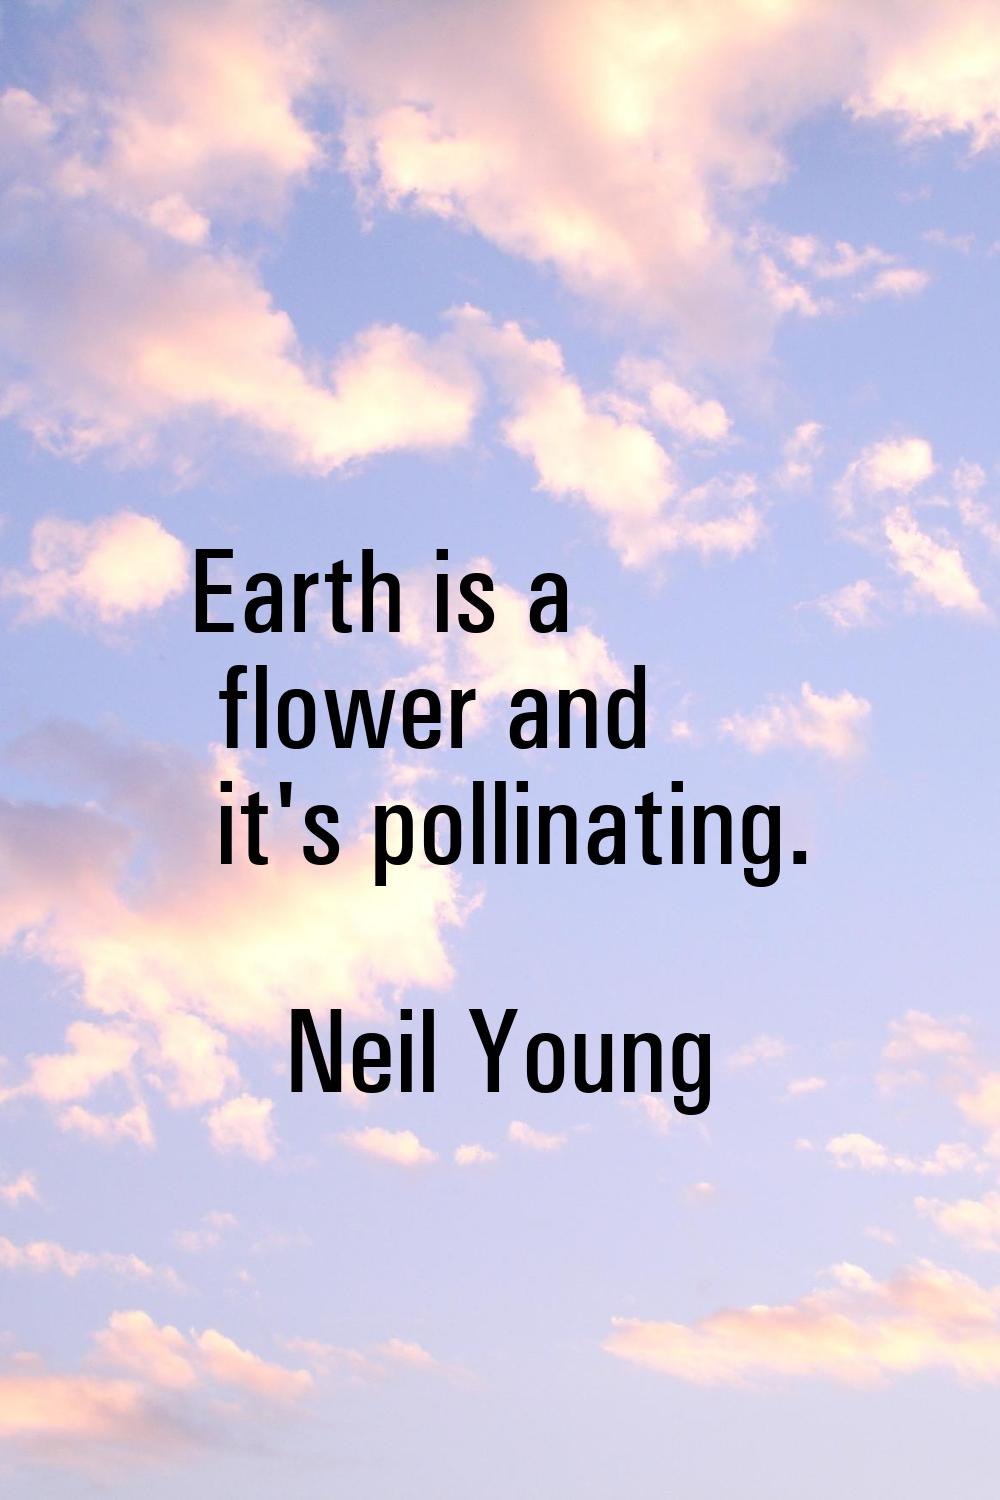 Earth is a flower and it's pollinating.